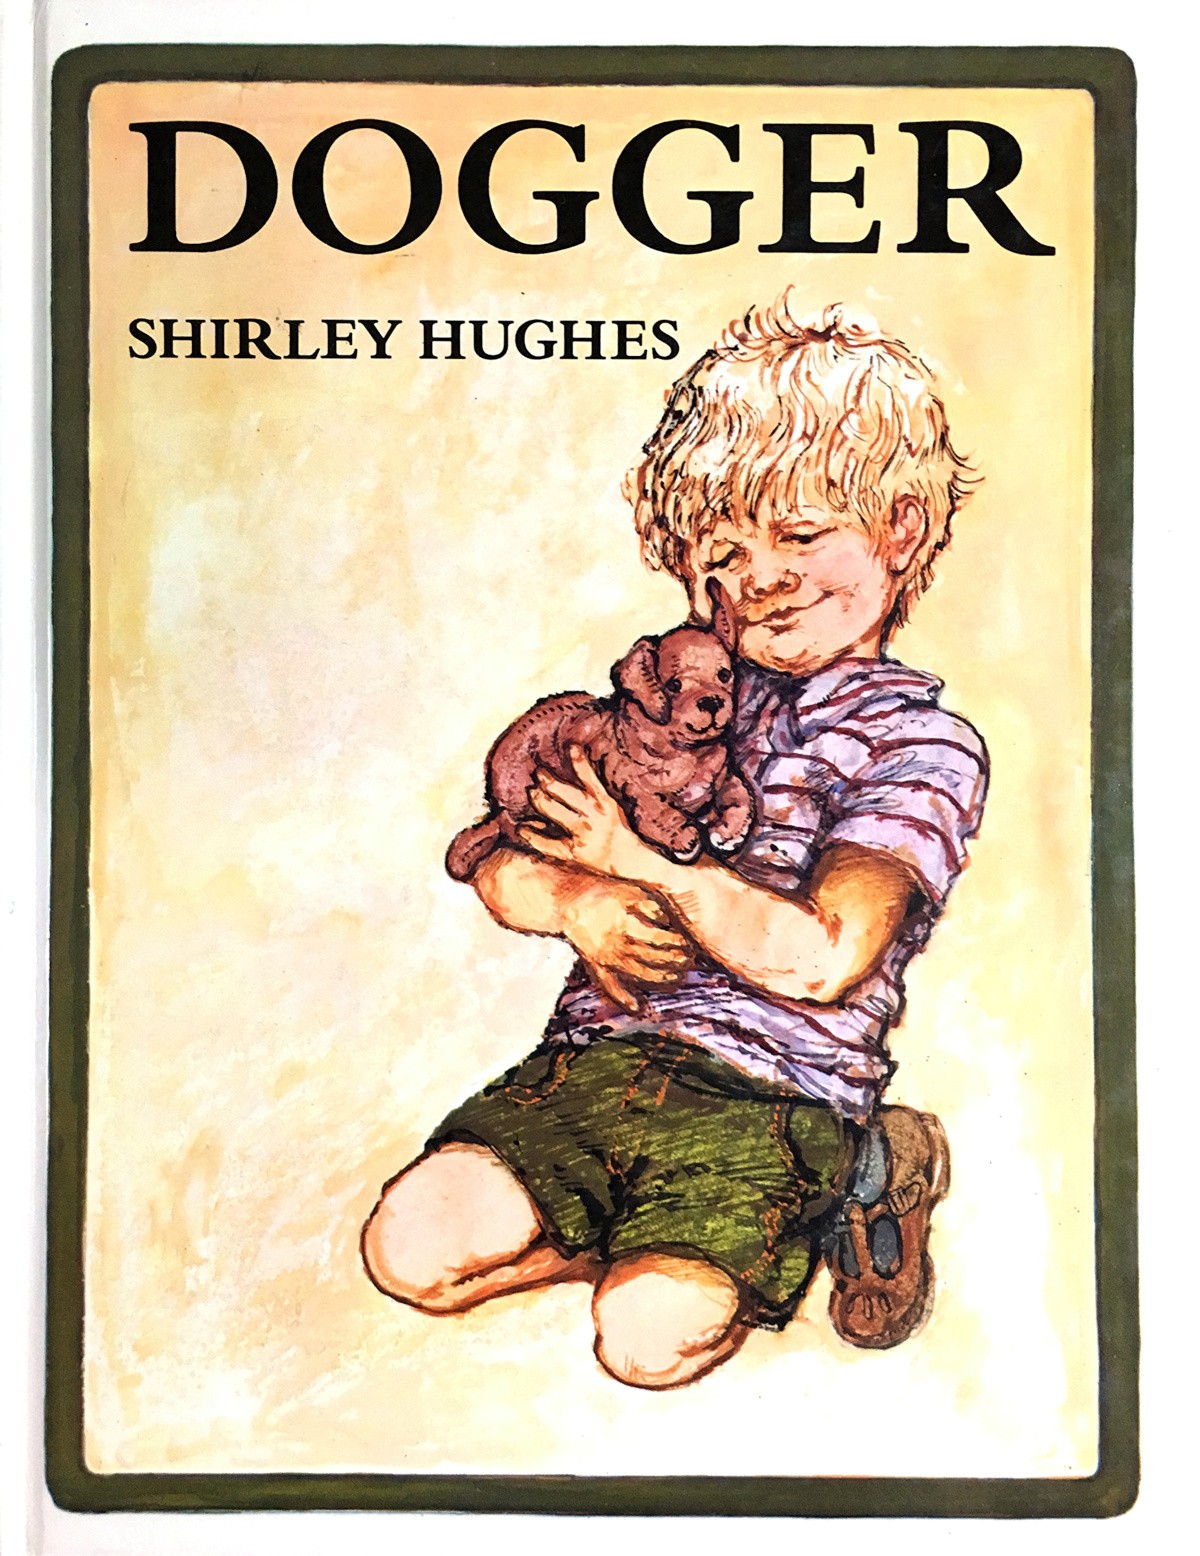 Dogger by Shirley Hughes Picture Book Analysis